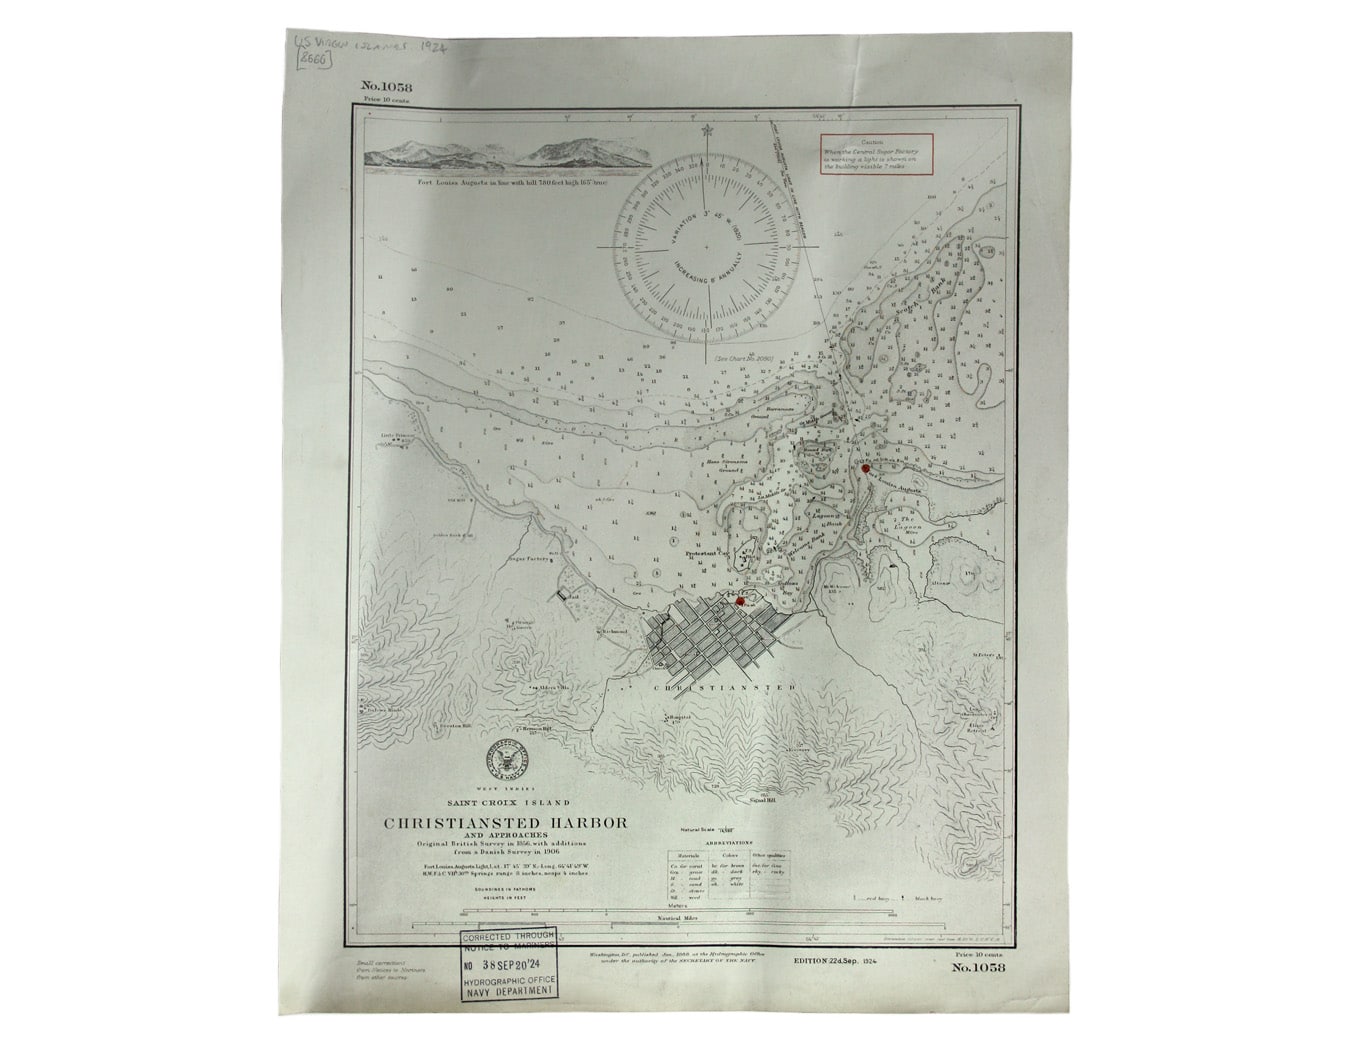 US Naval Chart of Christiansted, St Croix